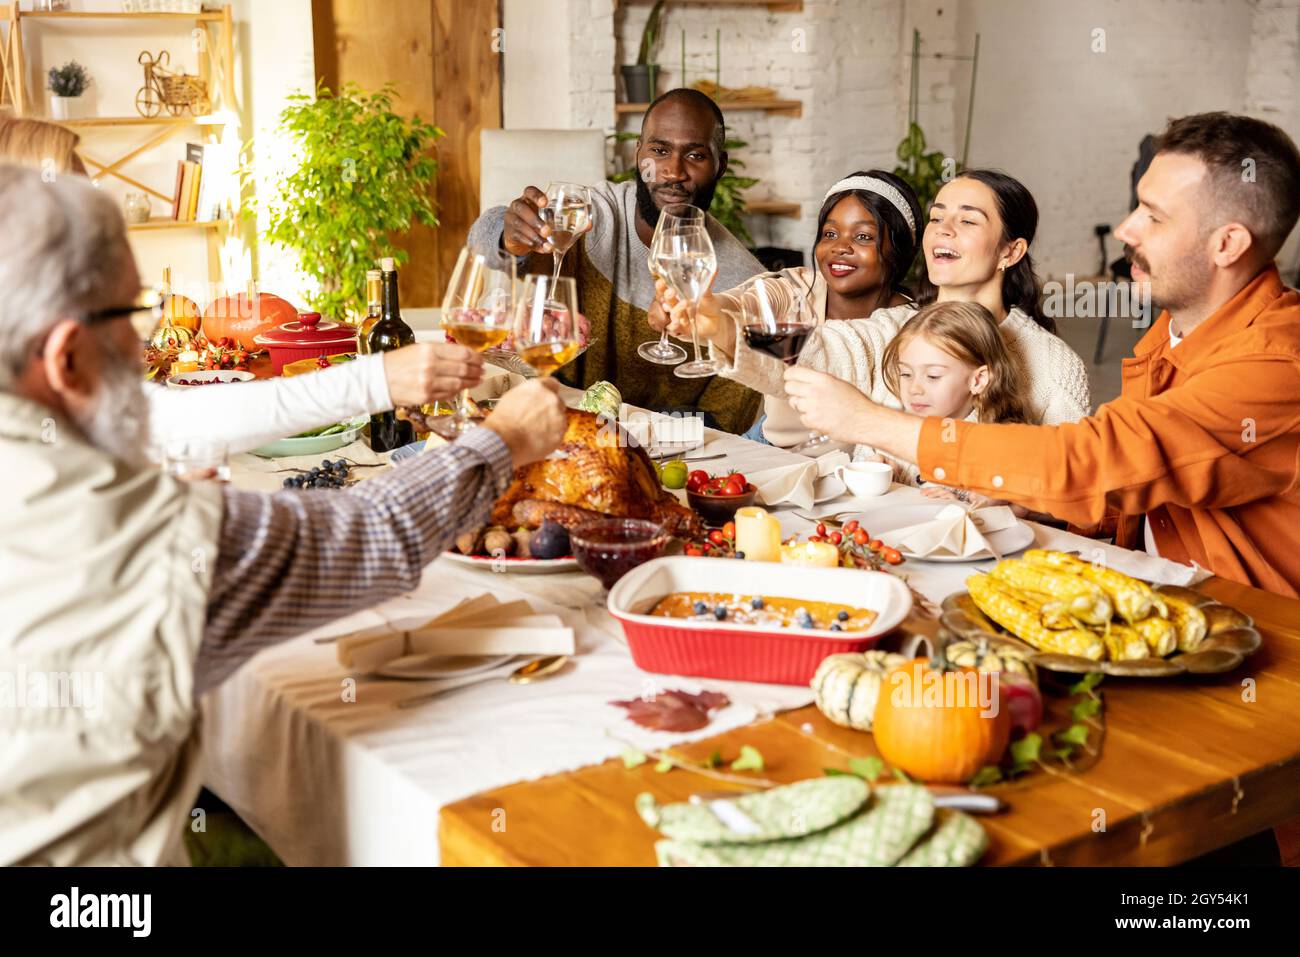 Happy Thanksgiving dinner party with family and friends with turkey and holiday traditional food, dishes on table. Stock Photo